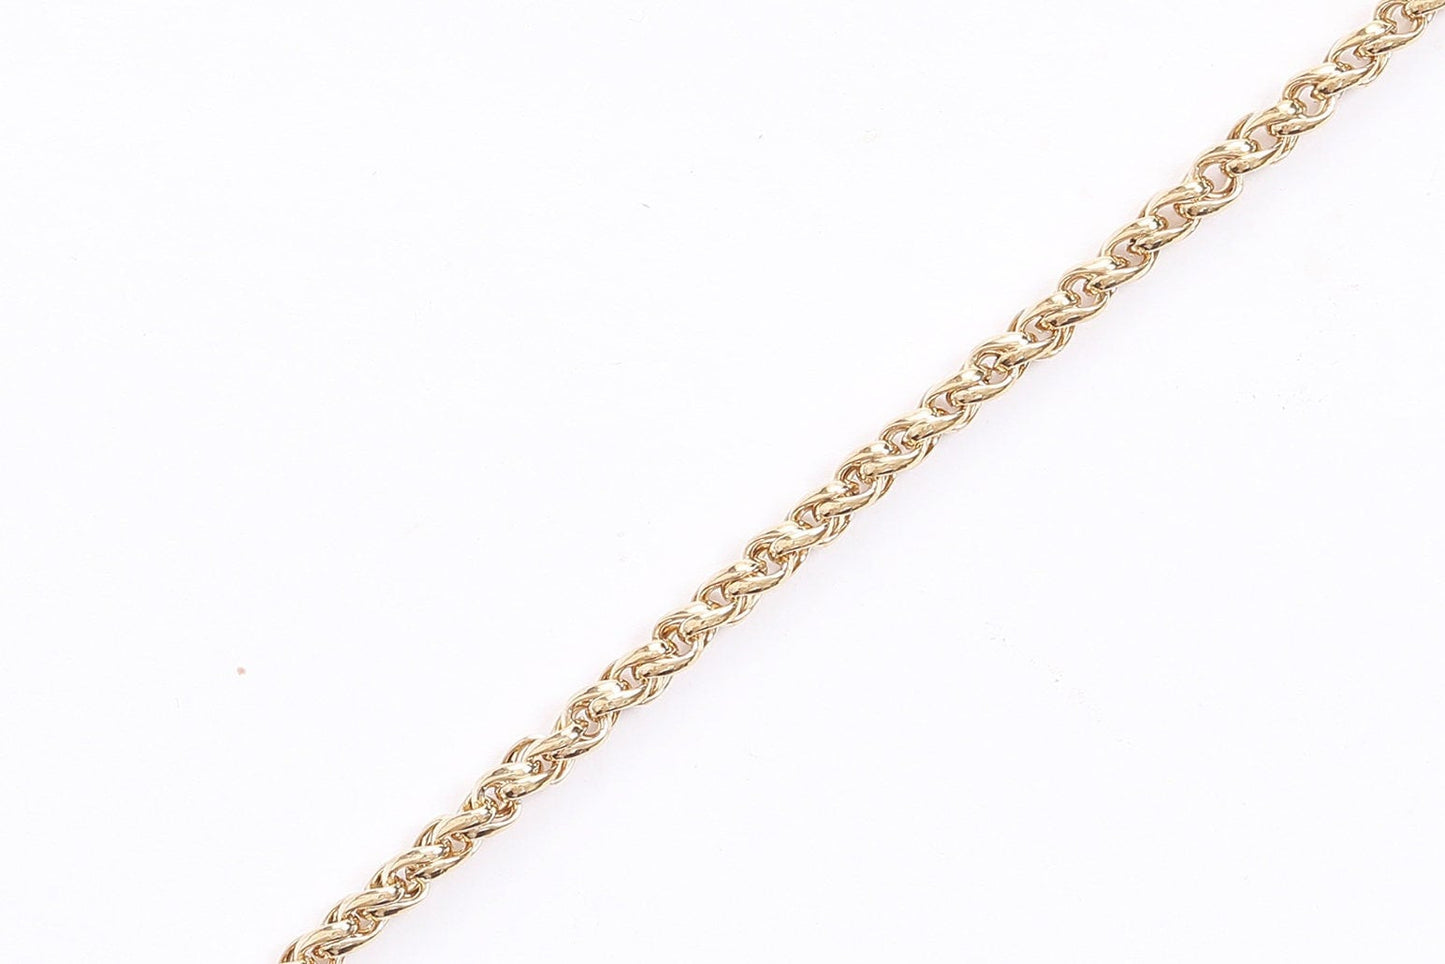 18k Gold Plated chain wheat chain thickness 2mm/4mm findings for jewelry making gfc097/gfc126 sold by the foot